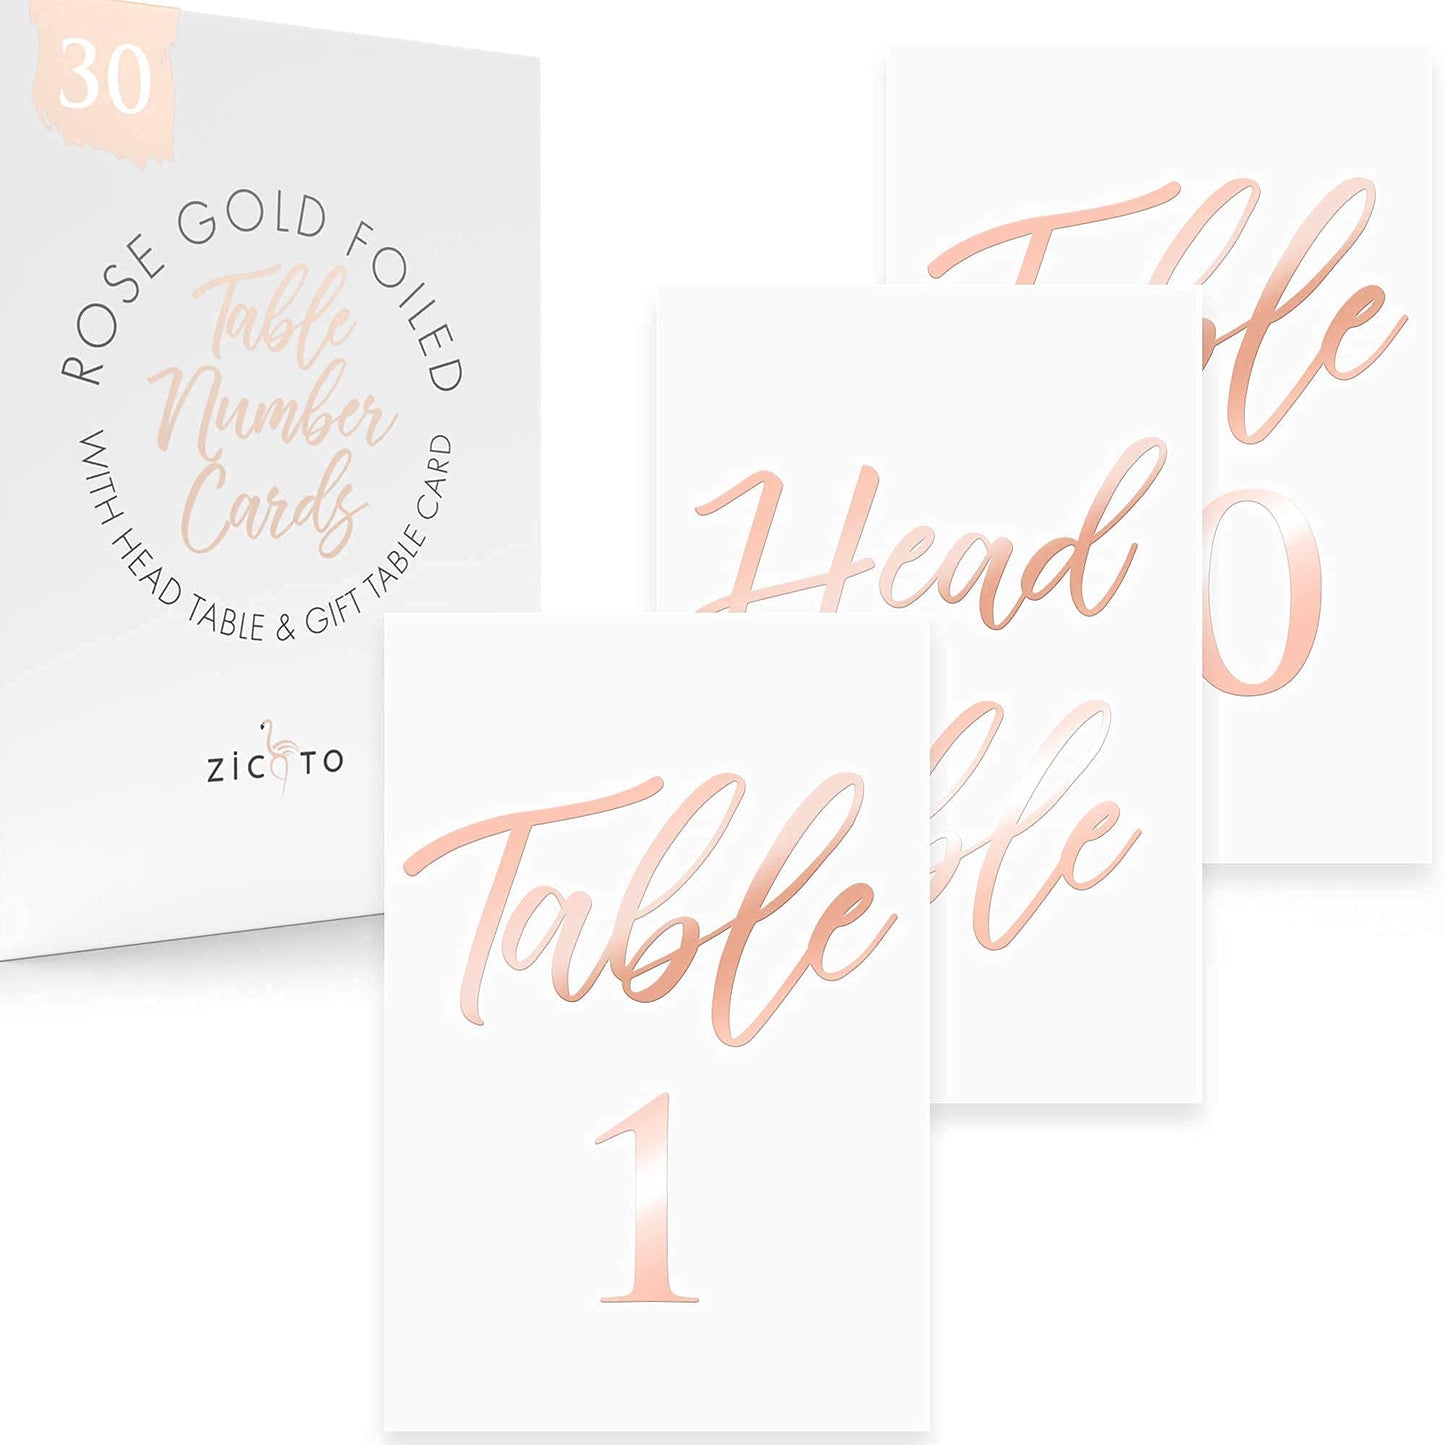 Beautiful Rose Gold Table Numbers for Wedding Reception in Double Sided Rose Gold Foil Lettering with Head Table Card - 4 x 6 inches and Numbered 1-30 - Perfect for Wedding Reception and Events